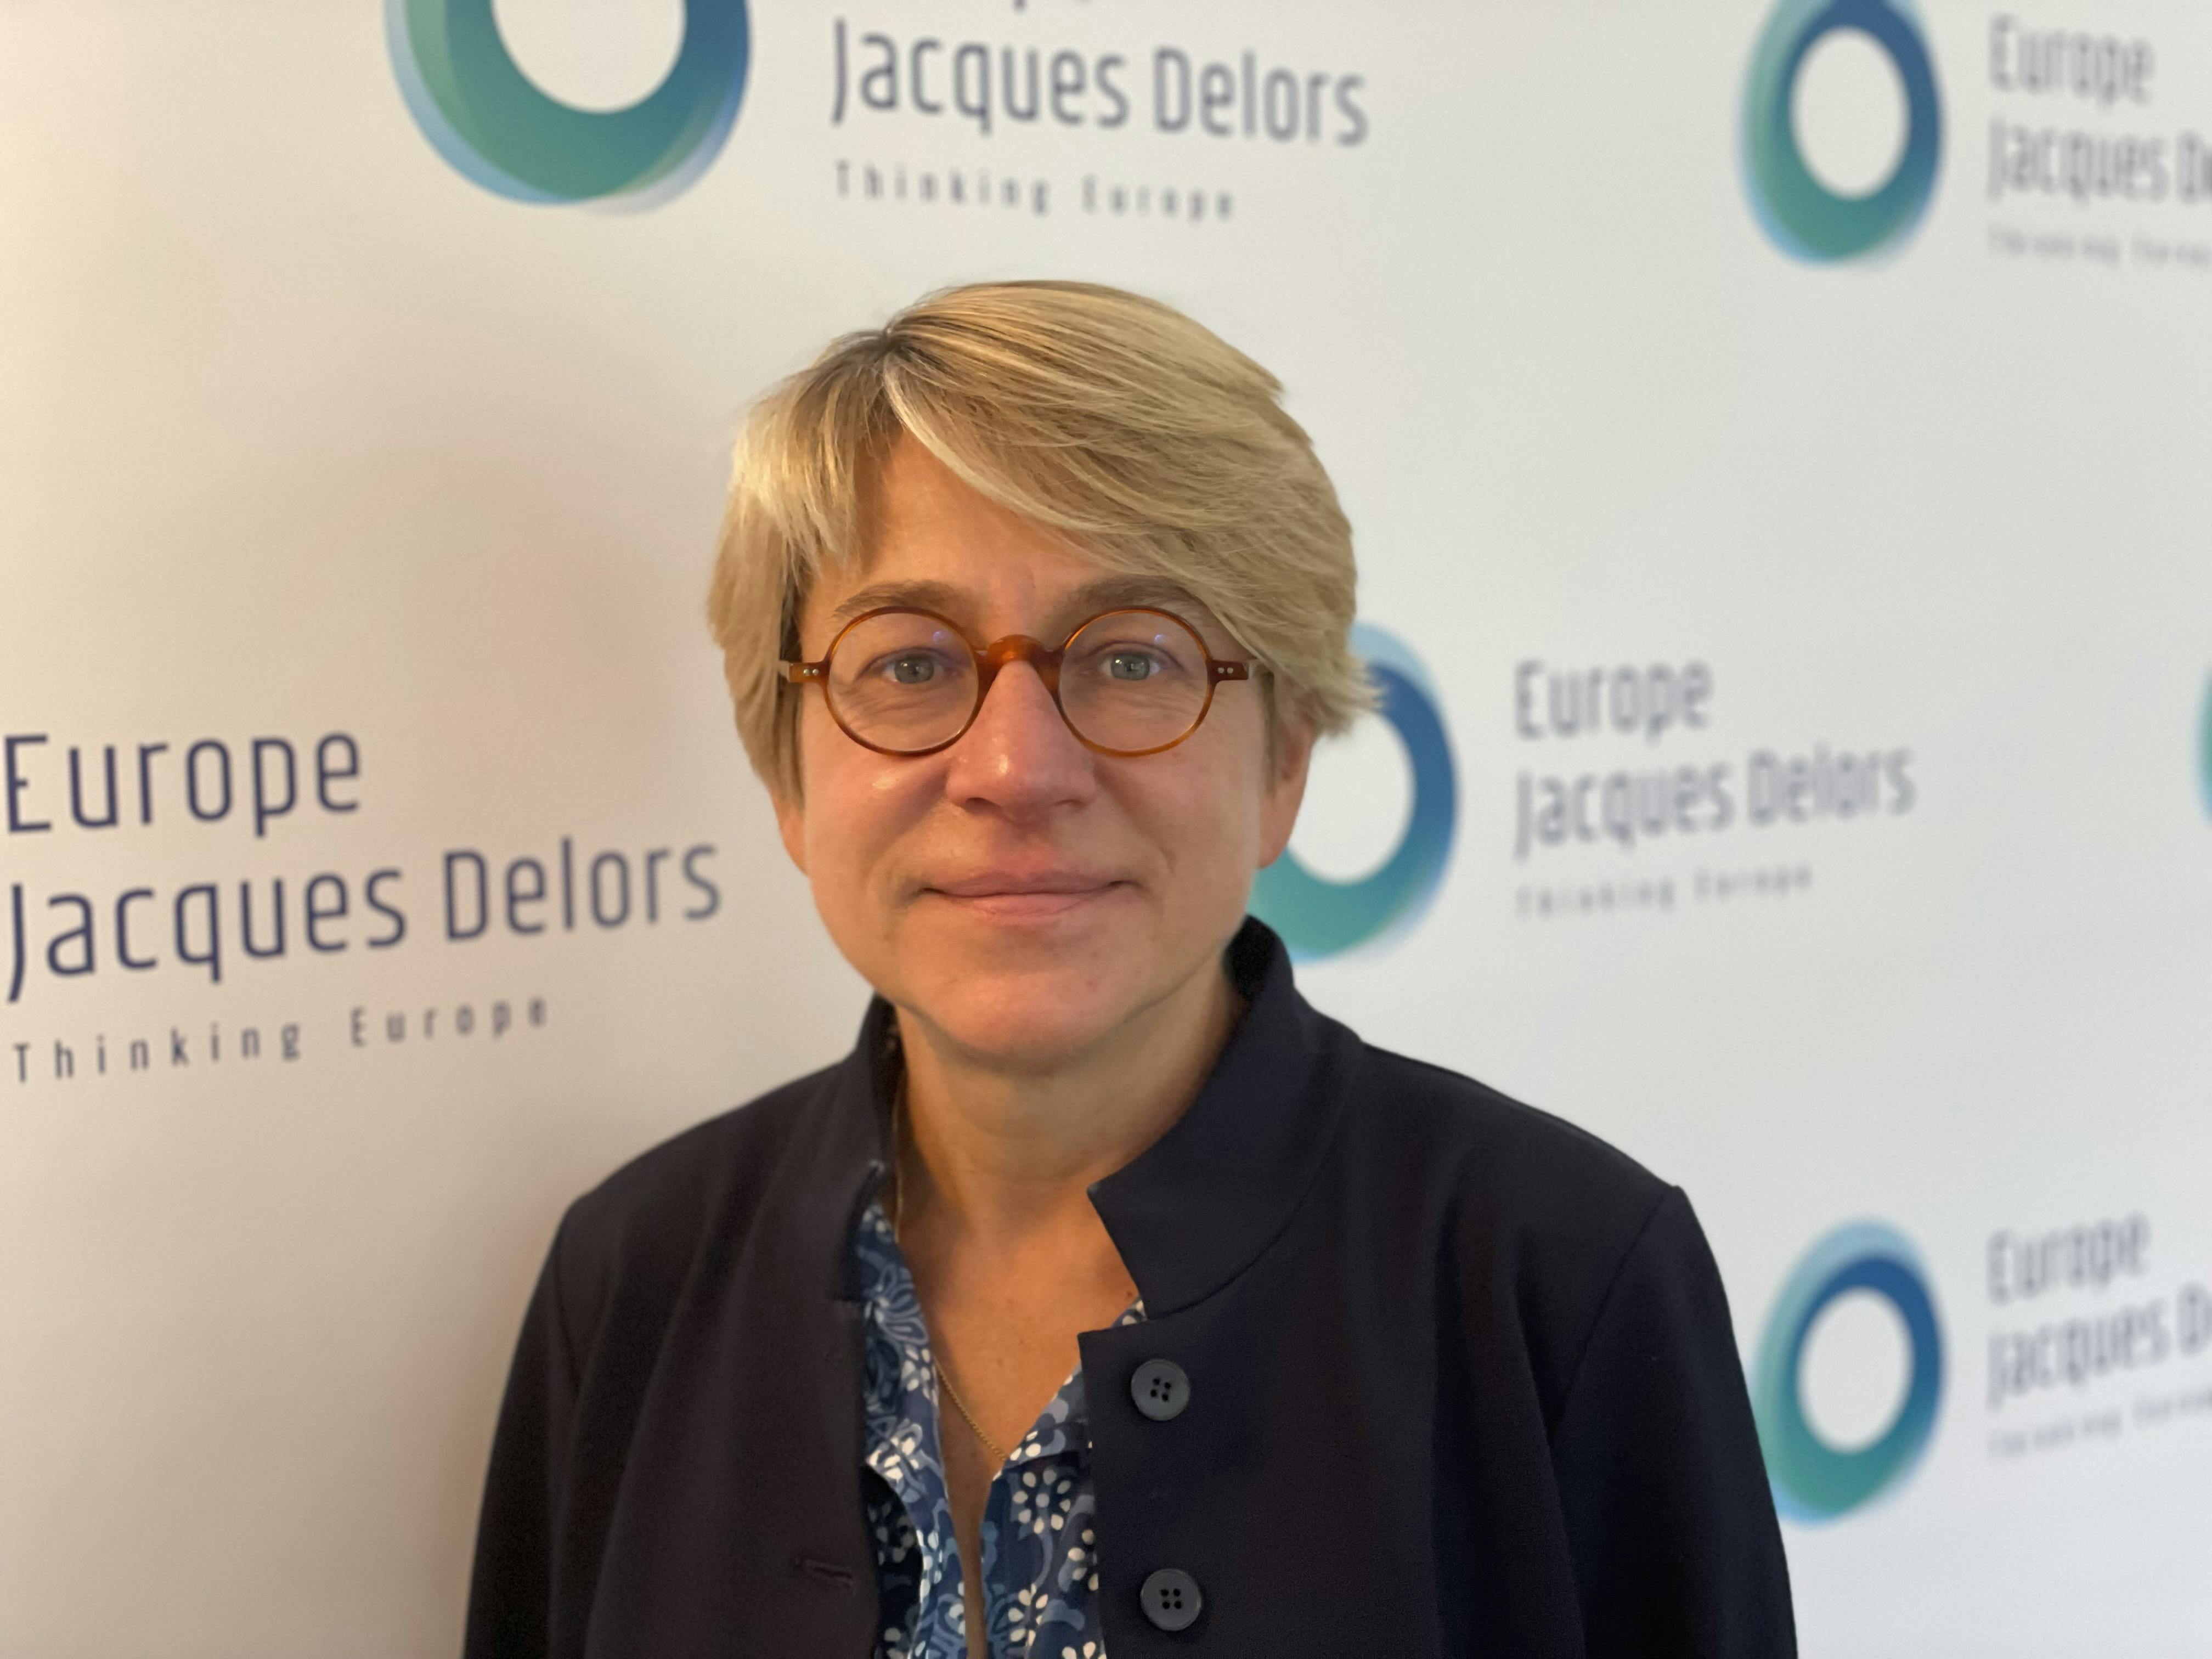 Isabelle Garzon has joined Europe Jacques Delors as Director of Studies and Development